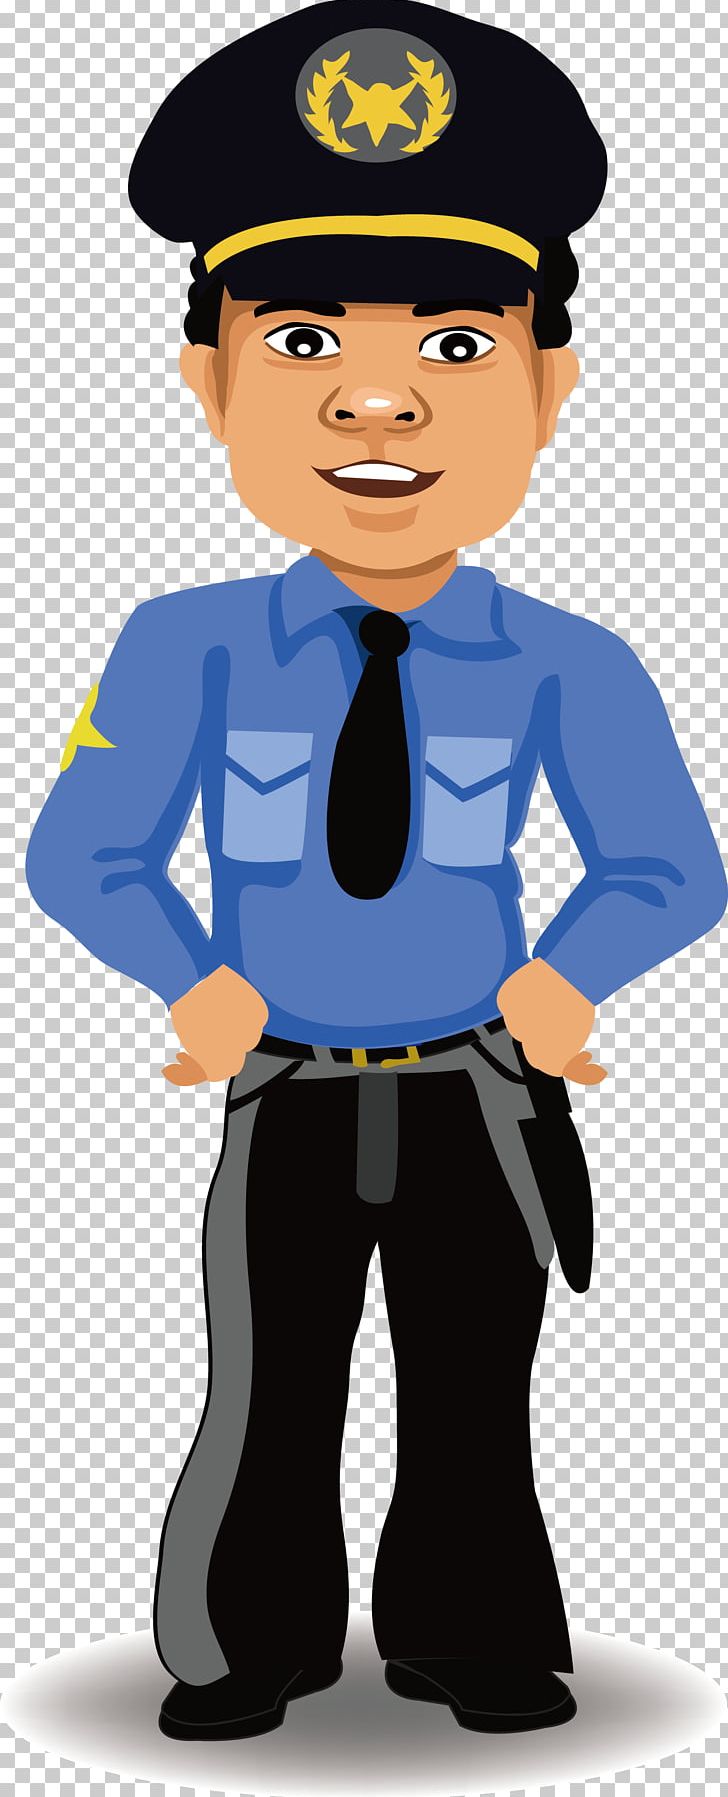 Police Officer Cartoon Security PNG, Clipart, Cartoon Characters, Encapsulated Postscript, Fundal, Happy Birthday Vector Images, Officer Free PNG Download